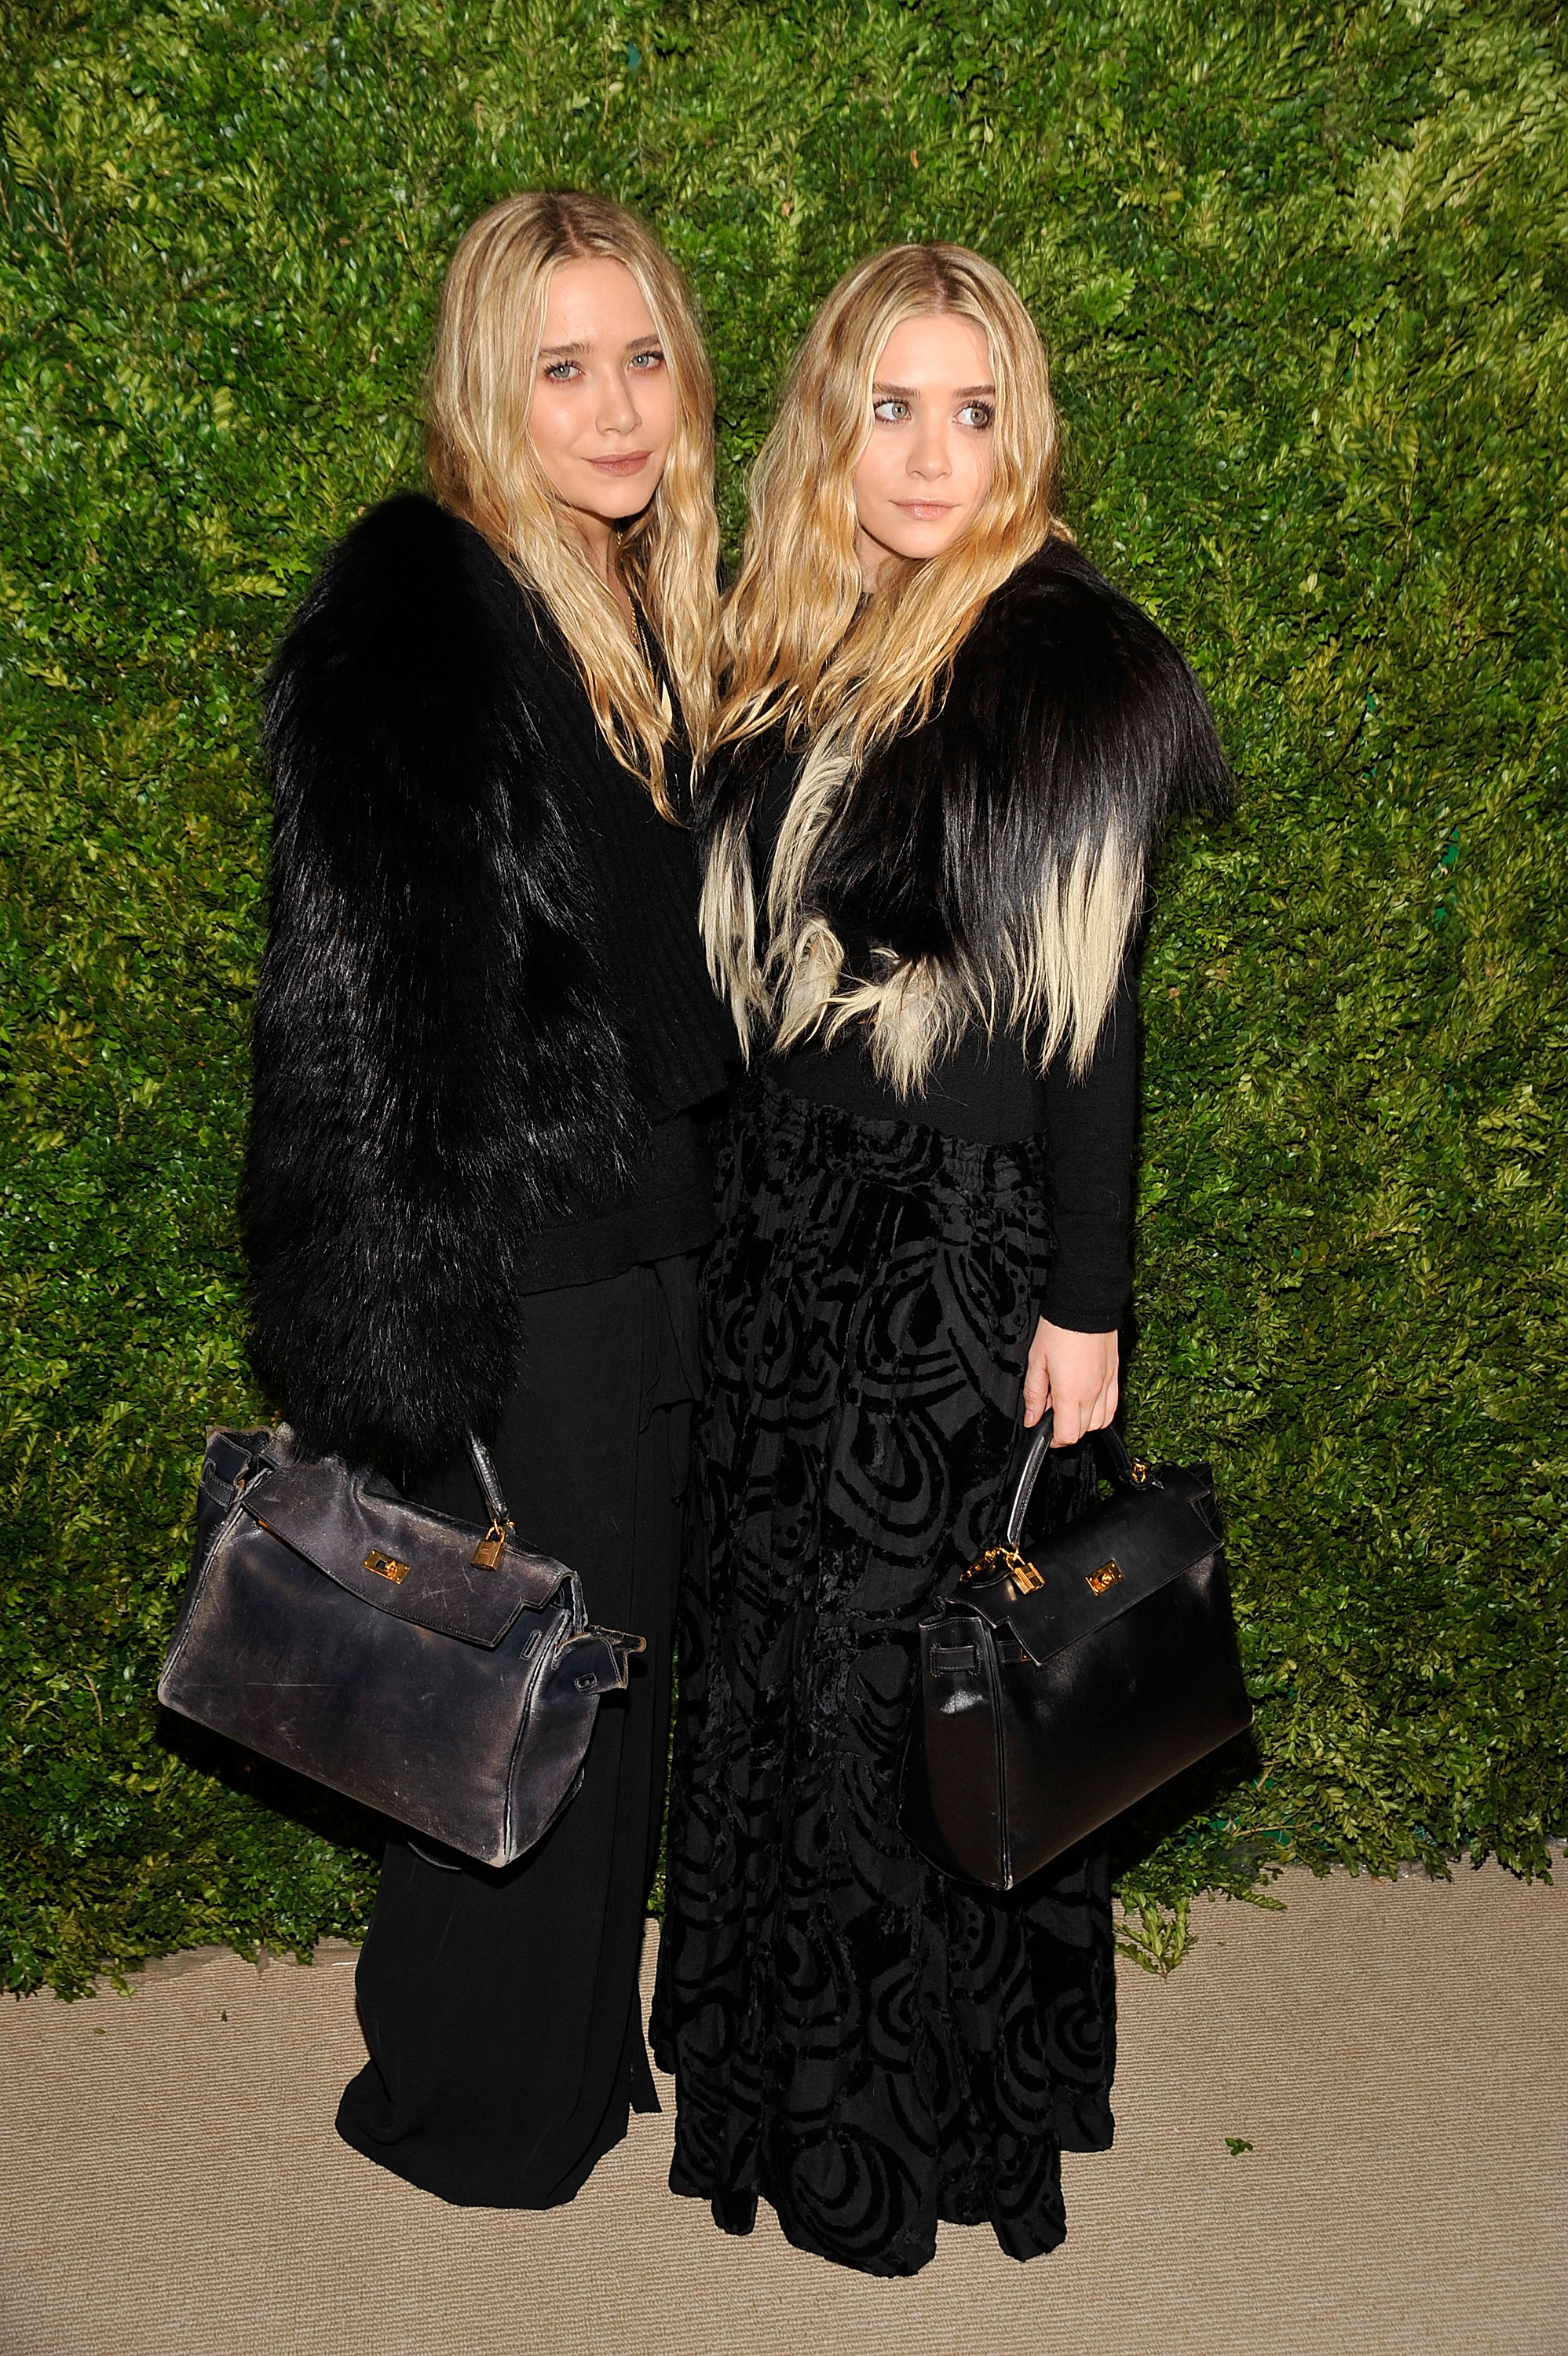 Ashley Olsen and Mary-Kate Olsen with their Kelly bags at the 7th Annual CFDA/Vogue Fashion Fund Awards at Skylight SOHO in New York City on November 15, 2010.